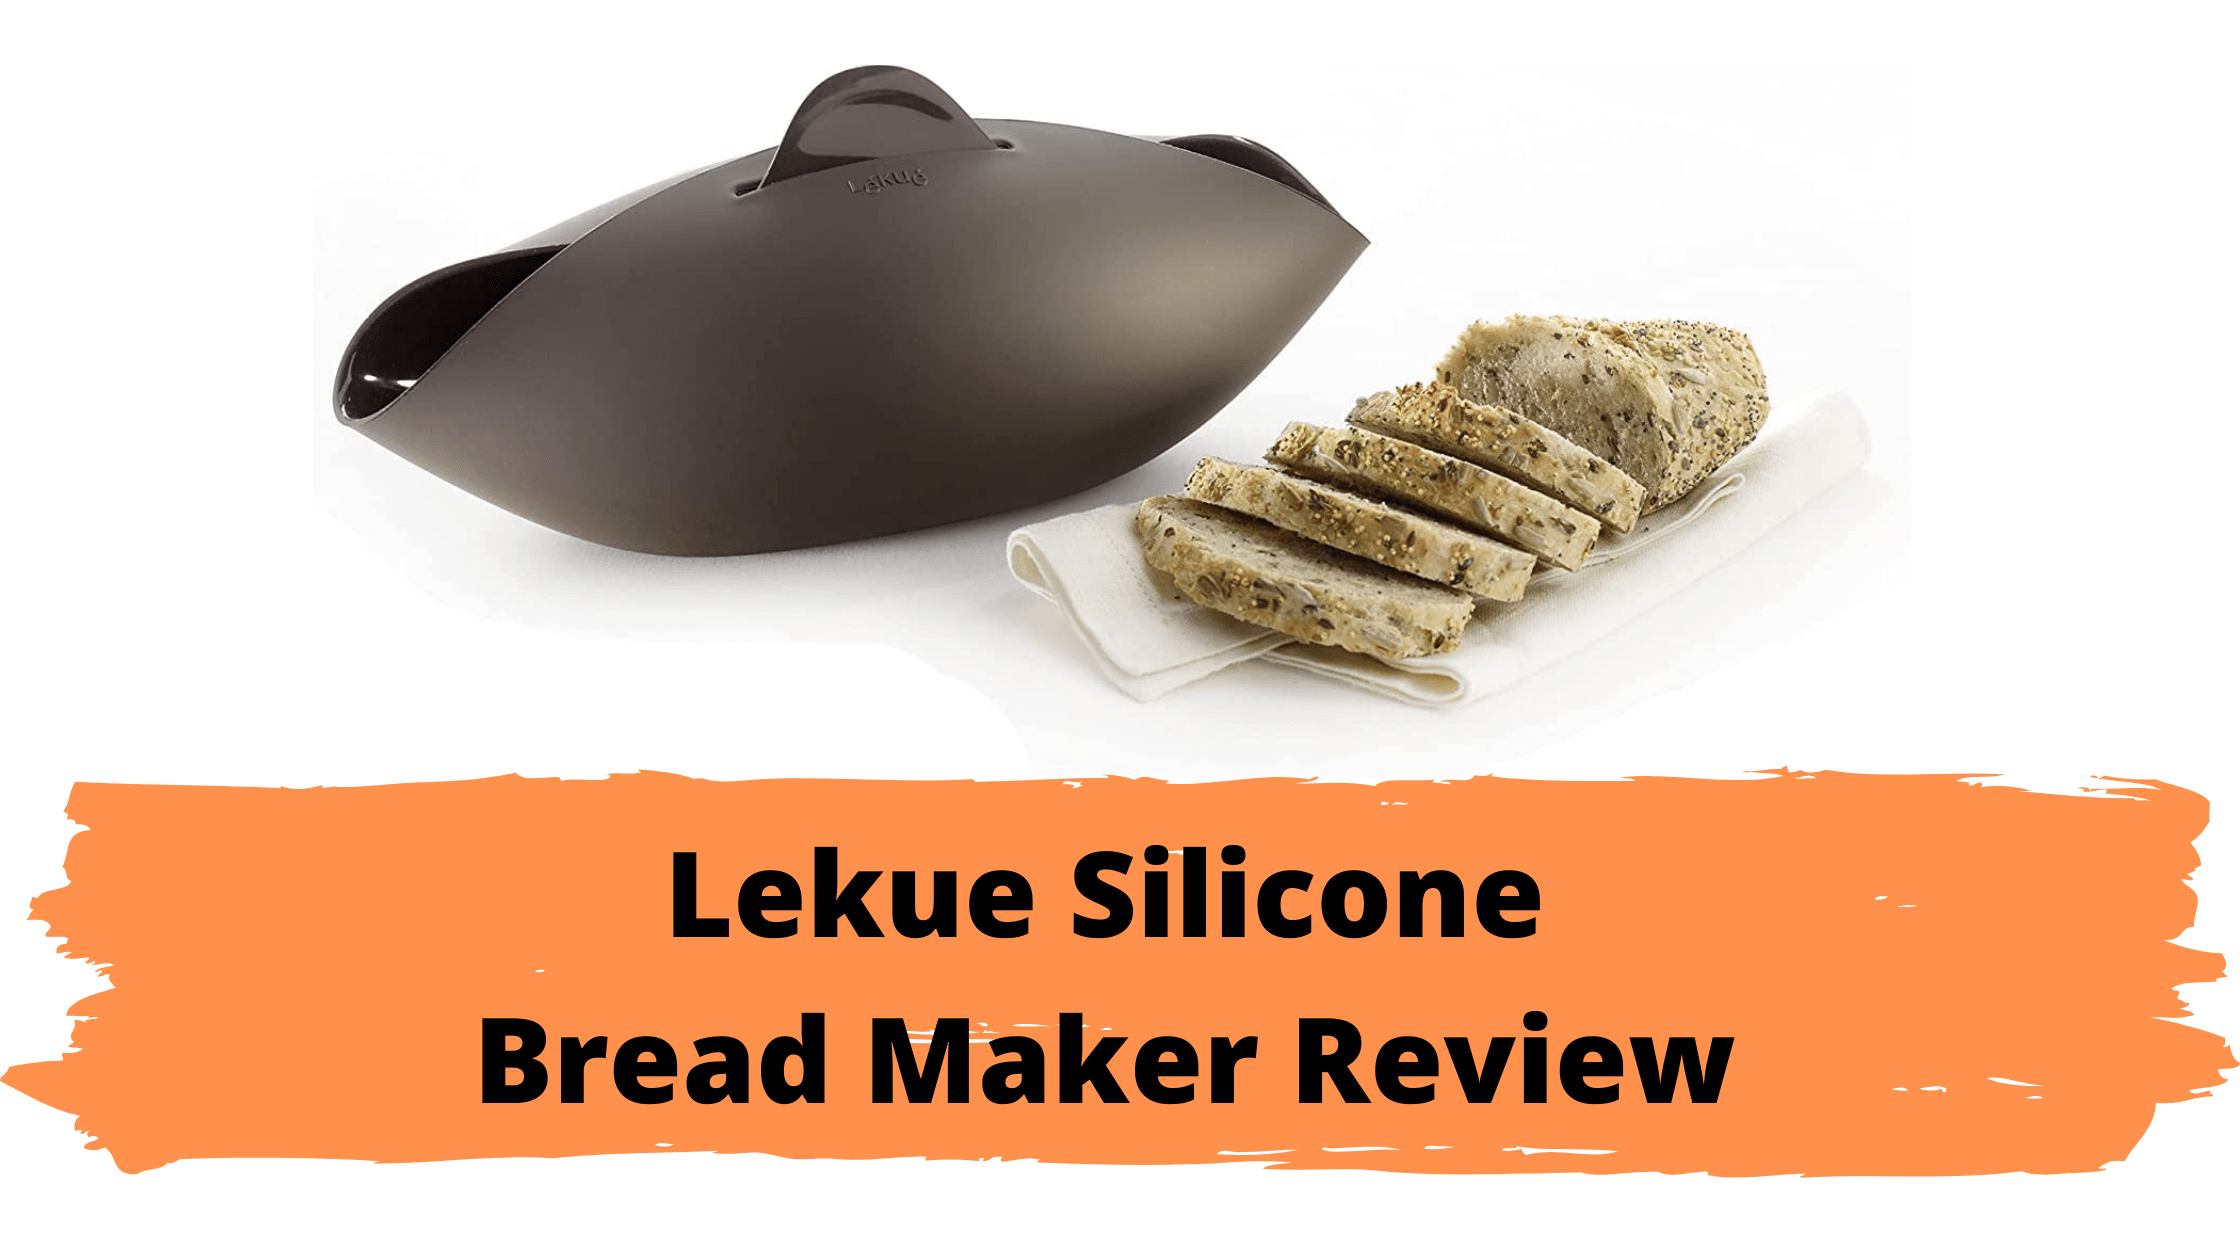 Lekue Silicone Bread Maker Review